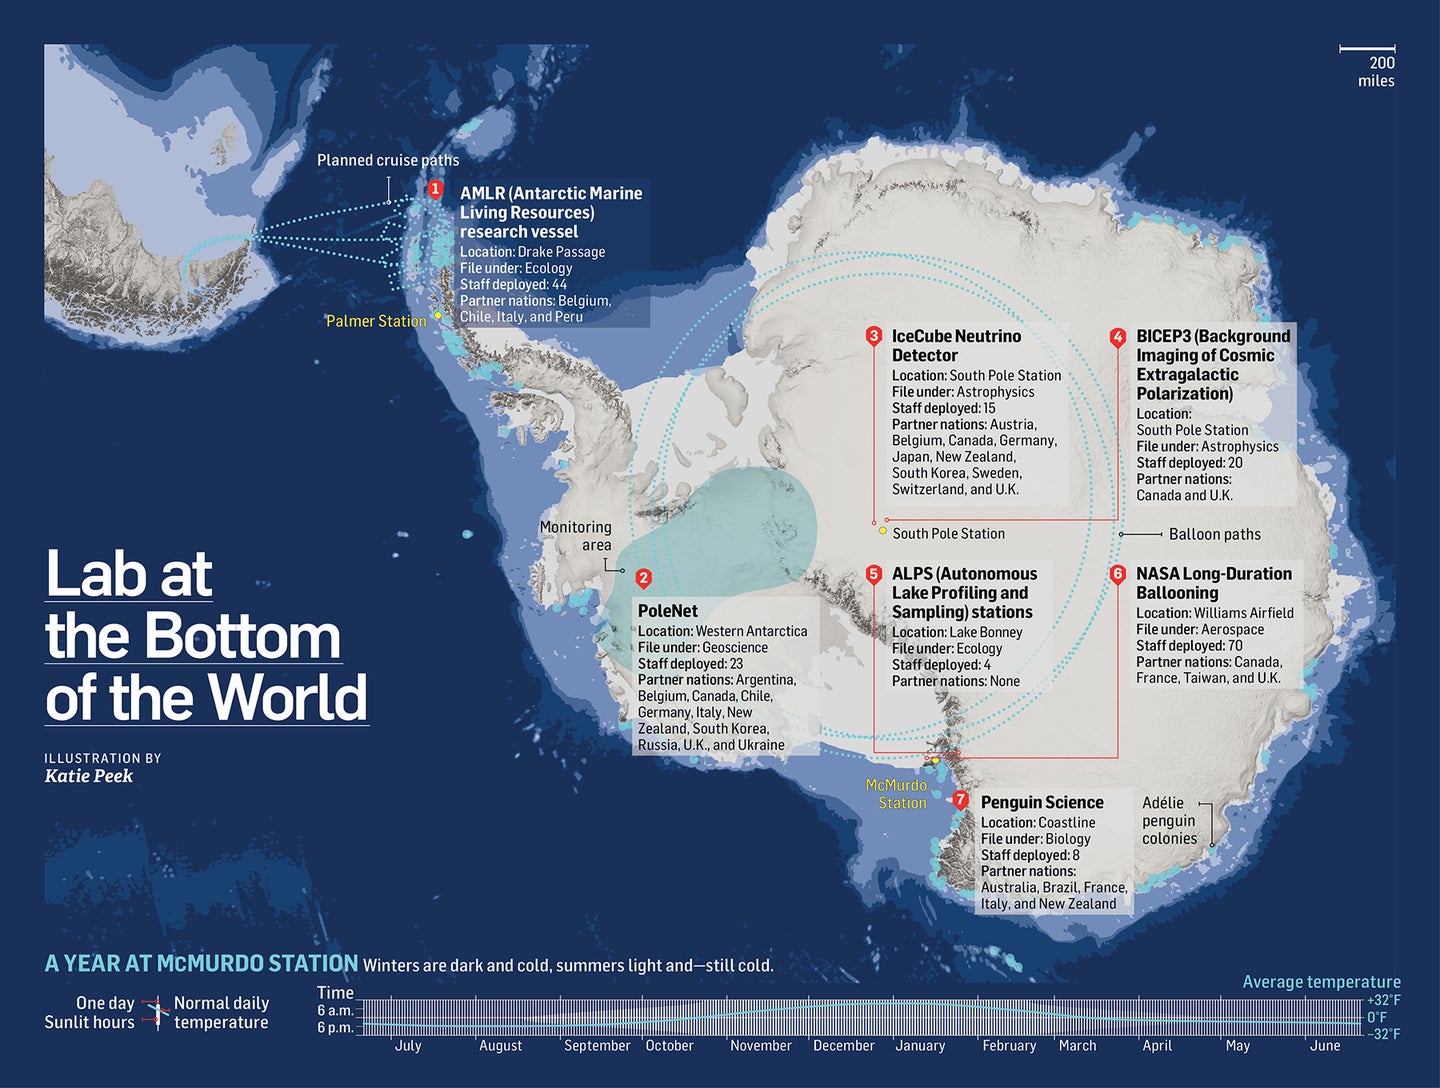 Seven experiments to watch this year on the Antarctic continent Bigger version.